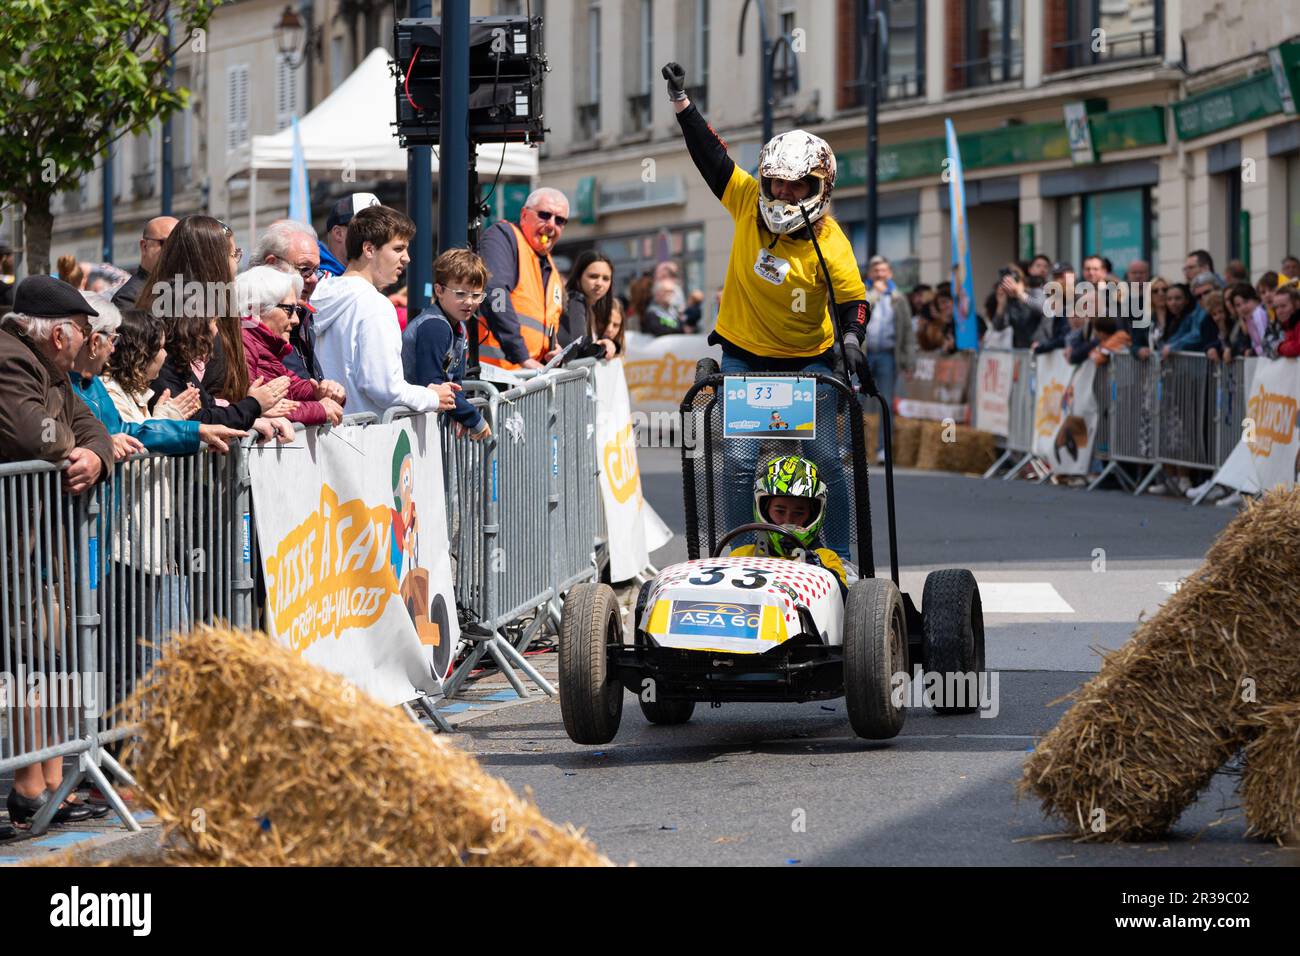 Second edition of a soapbox race in the heart of the city center of Crépy-en-Valois. Homemade soap box hurtling down the slope of the main street. Stock Photo